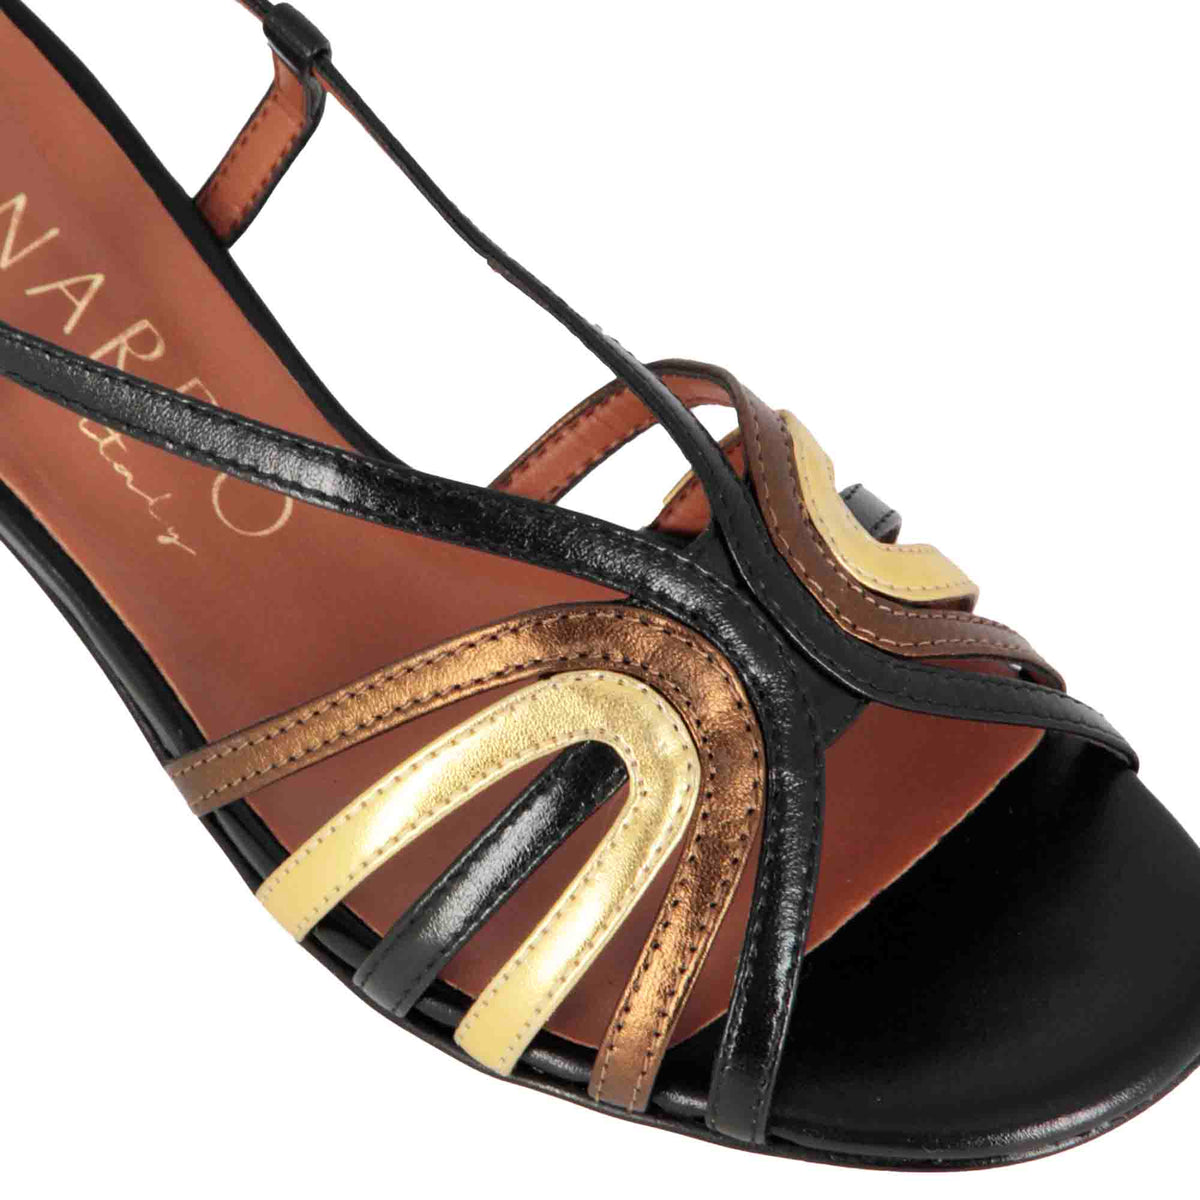 Women's sandal with multicolor laminated leather bands